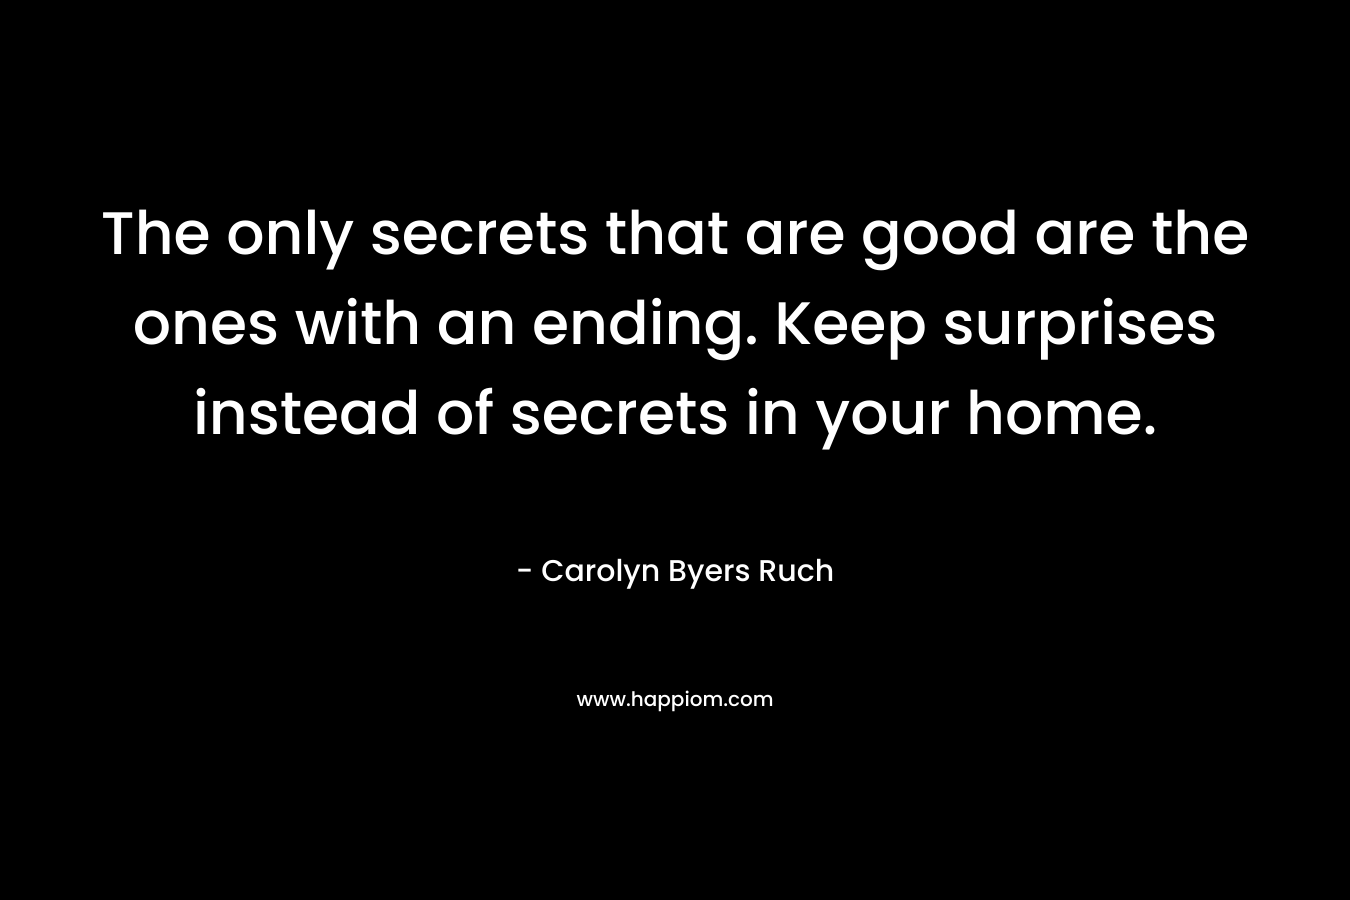 The only secrets that are good are the ones with an ending. Keep surprises instead of secrets in your home.